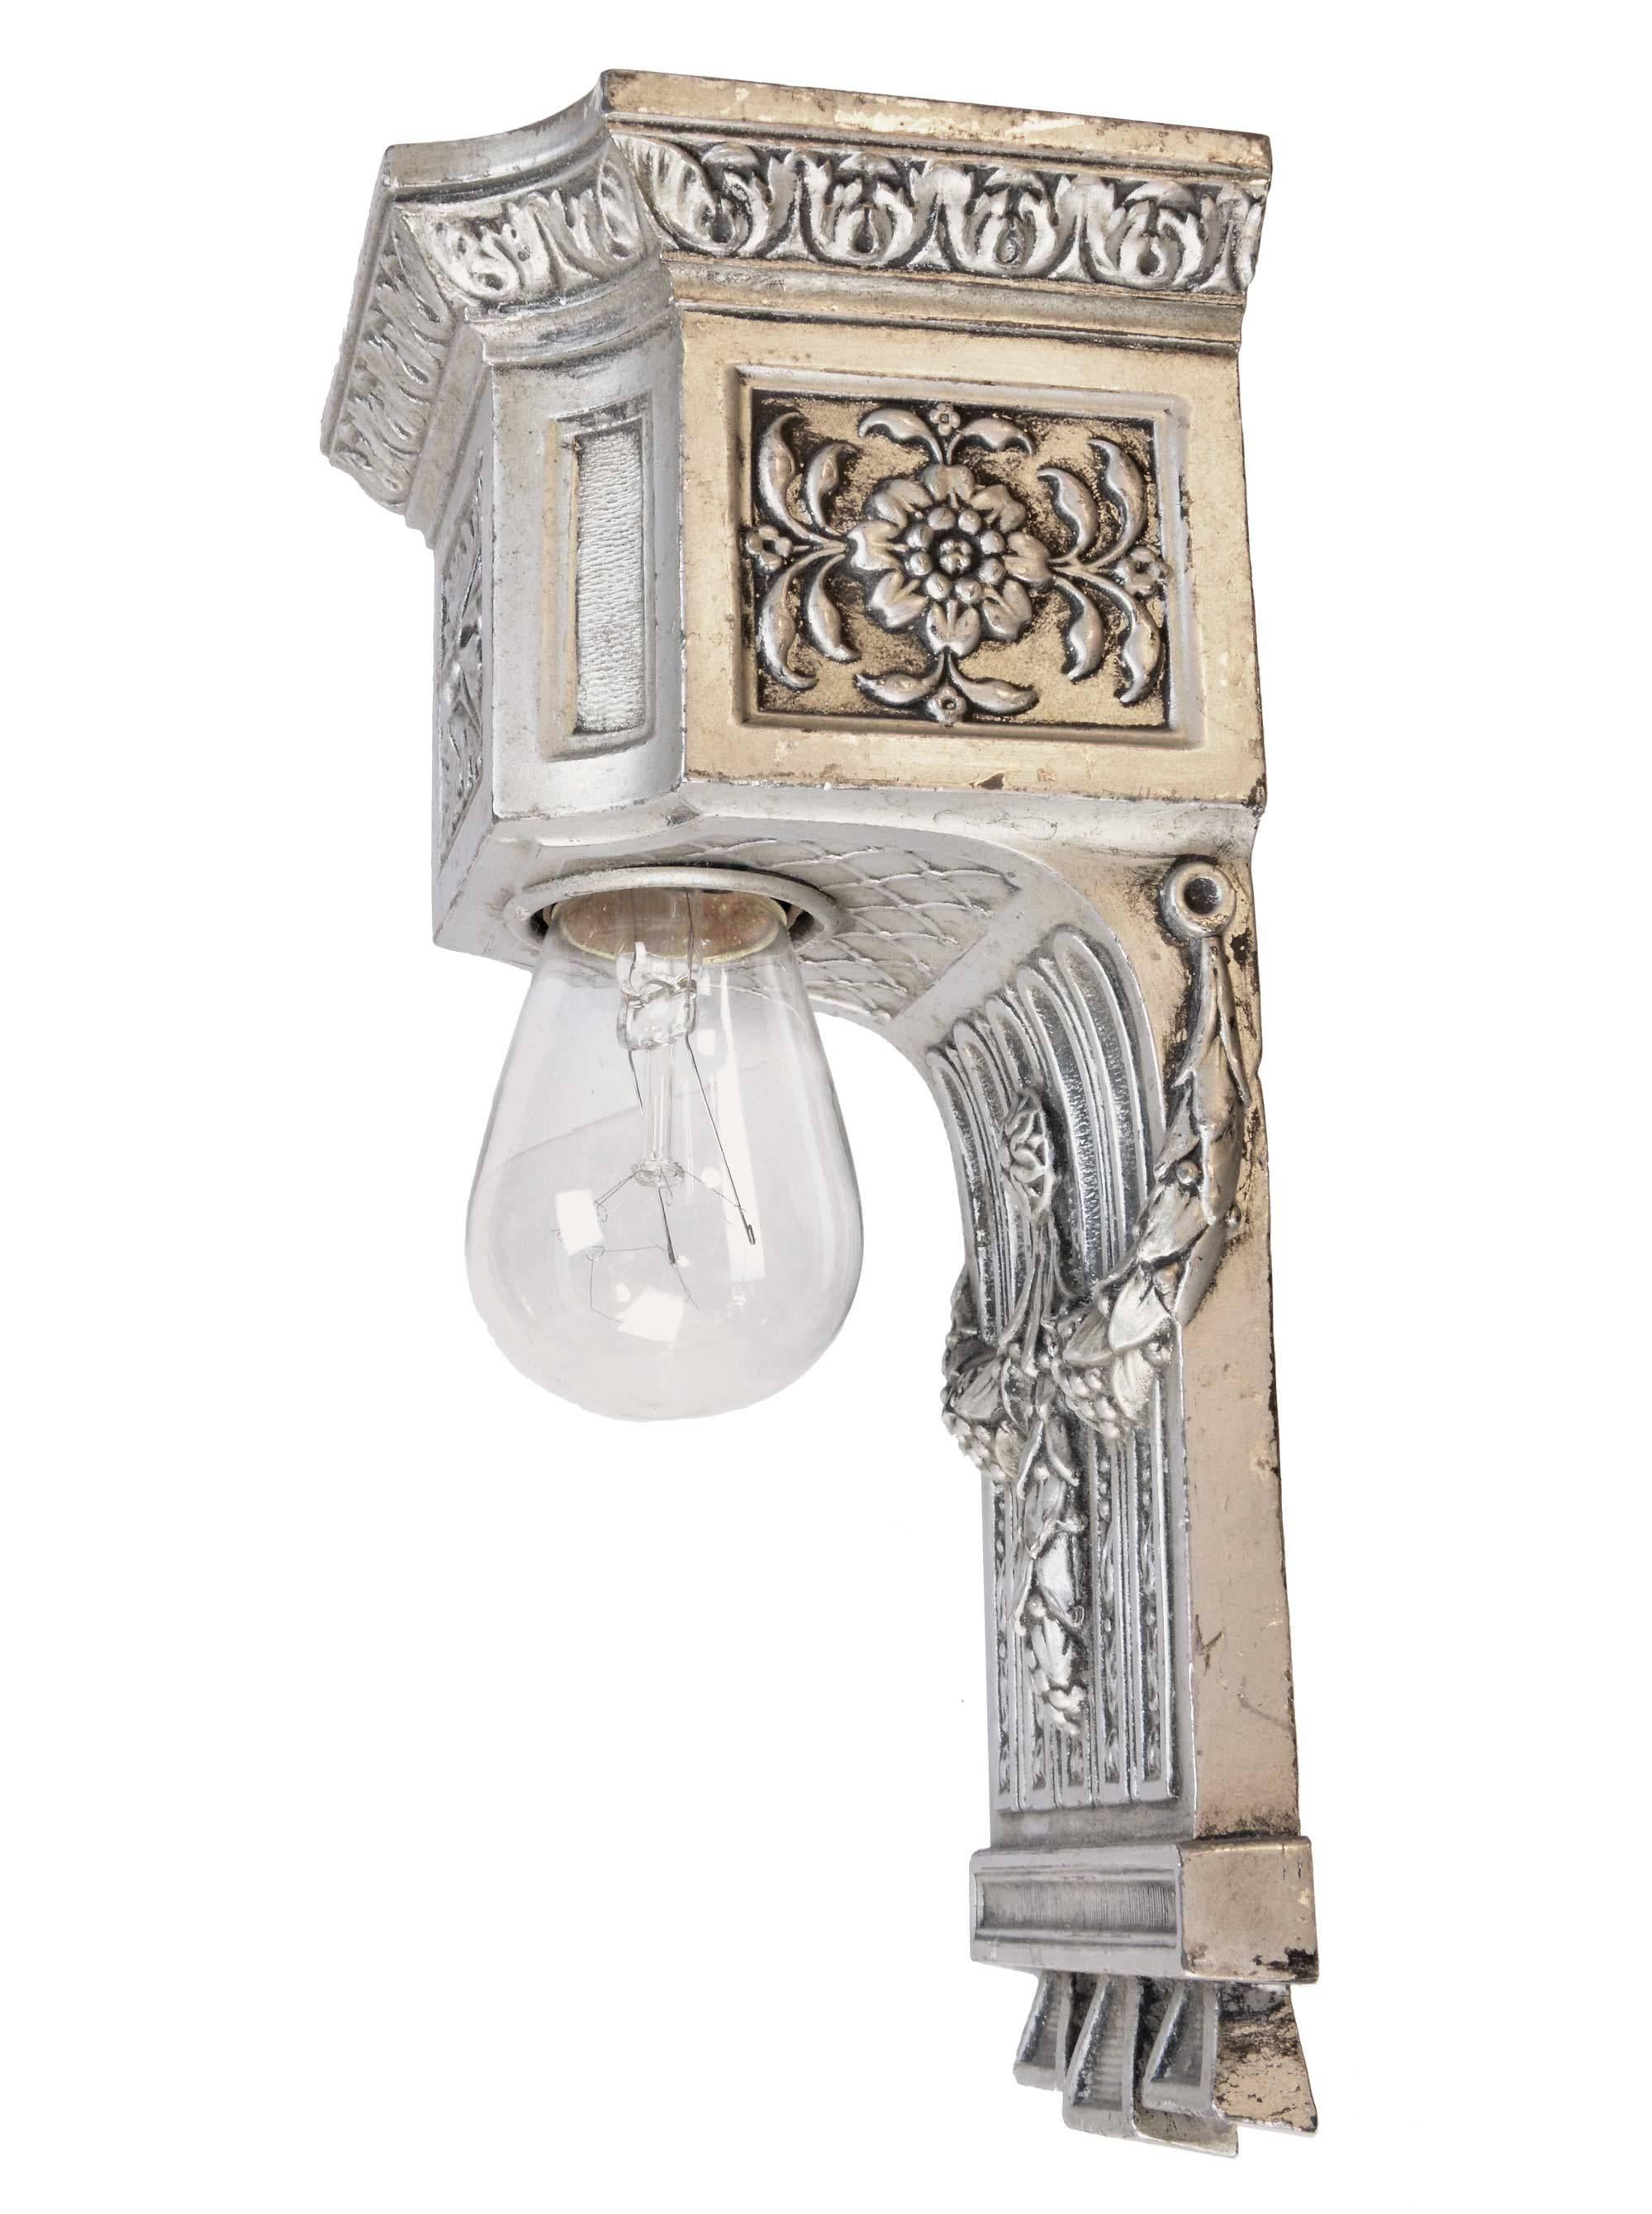 This fabulous pair of early American lighting is made from cast brass plated in silver. Made circa 1915 in the Beaux Arts style, there is beautiful decoration throughout these sconces, including fanciful ropes and swags that reference Classical